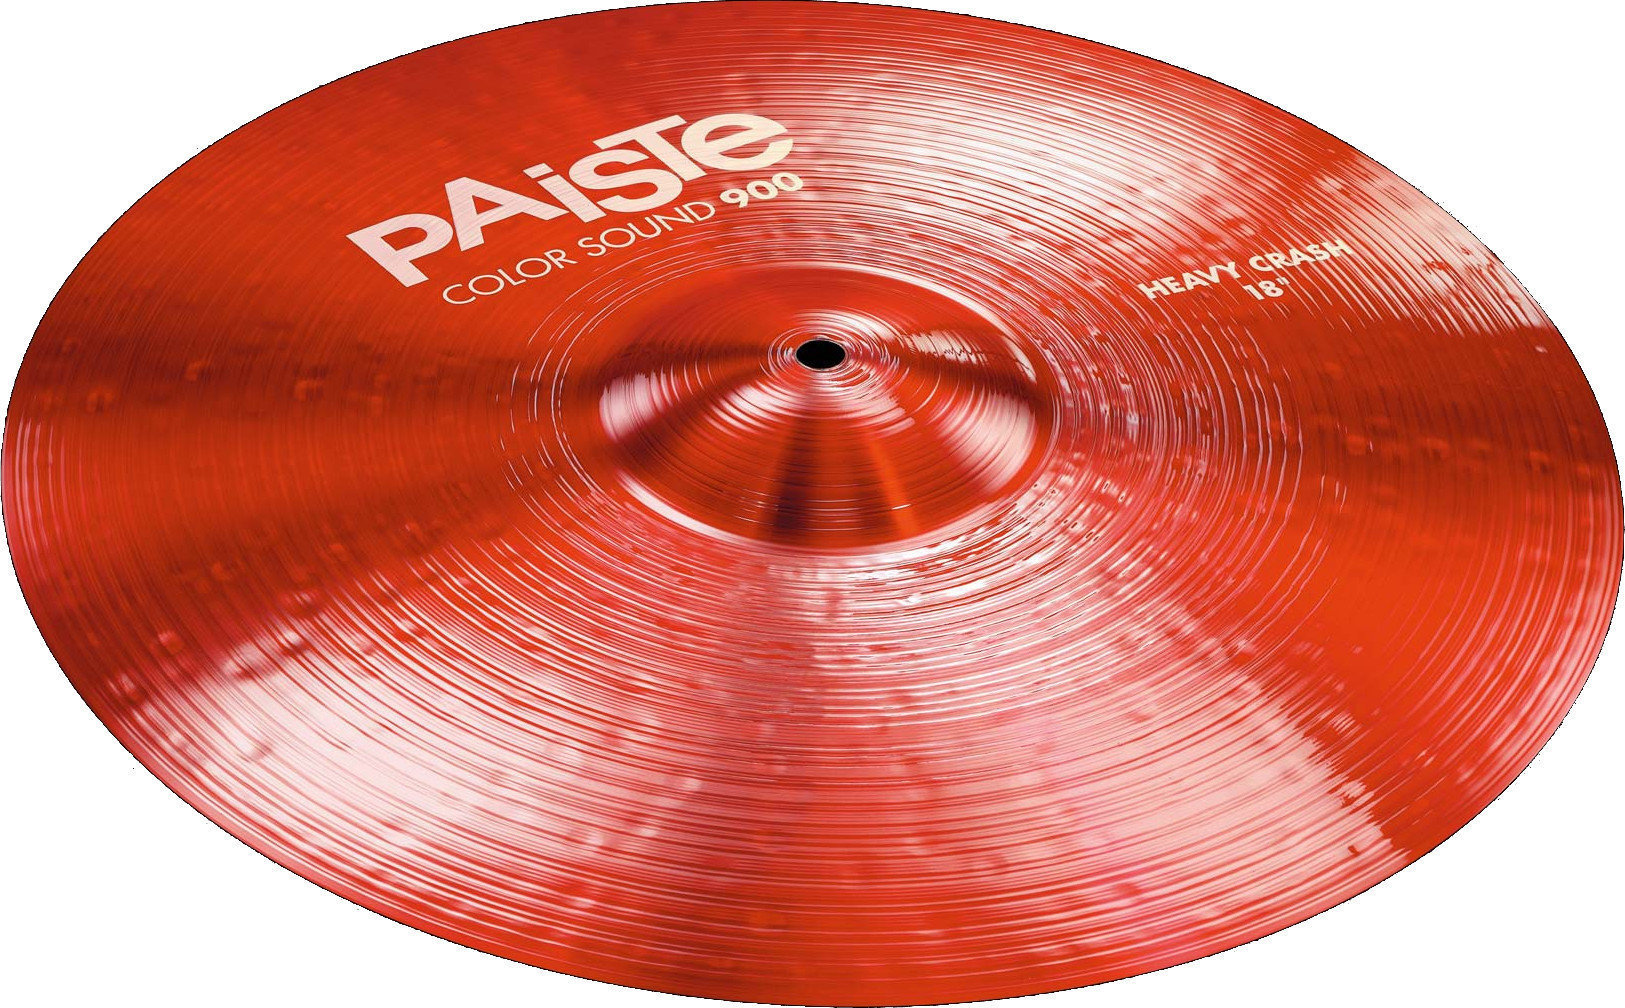 Crash Cymbal Paiste Color Sound 900  Heavy Crash Cymbal 18" Red